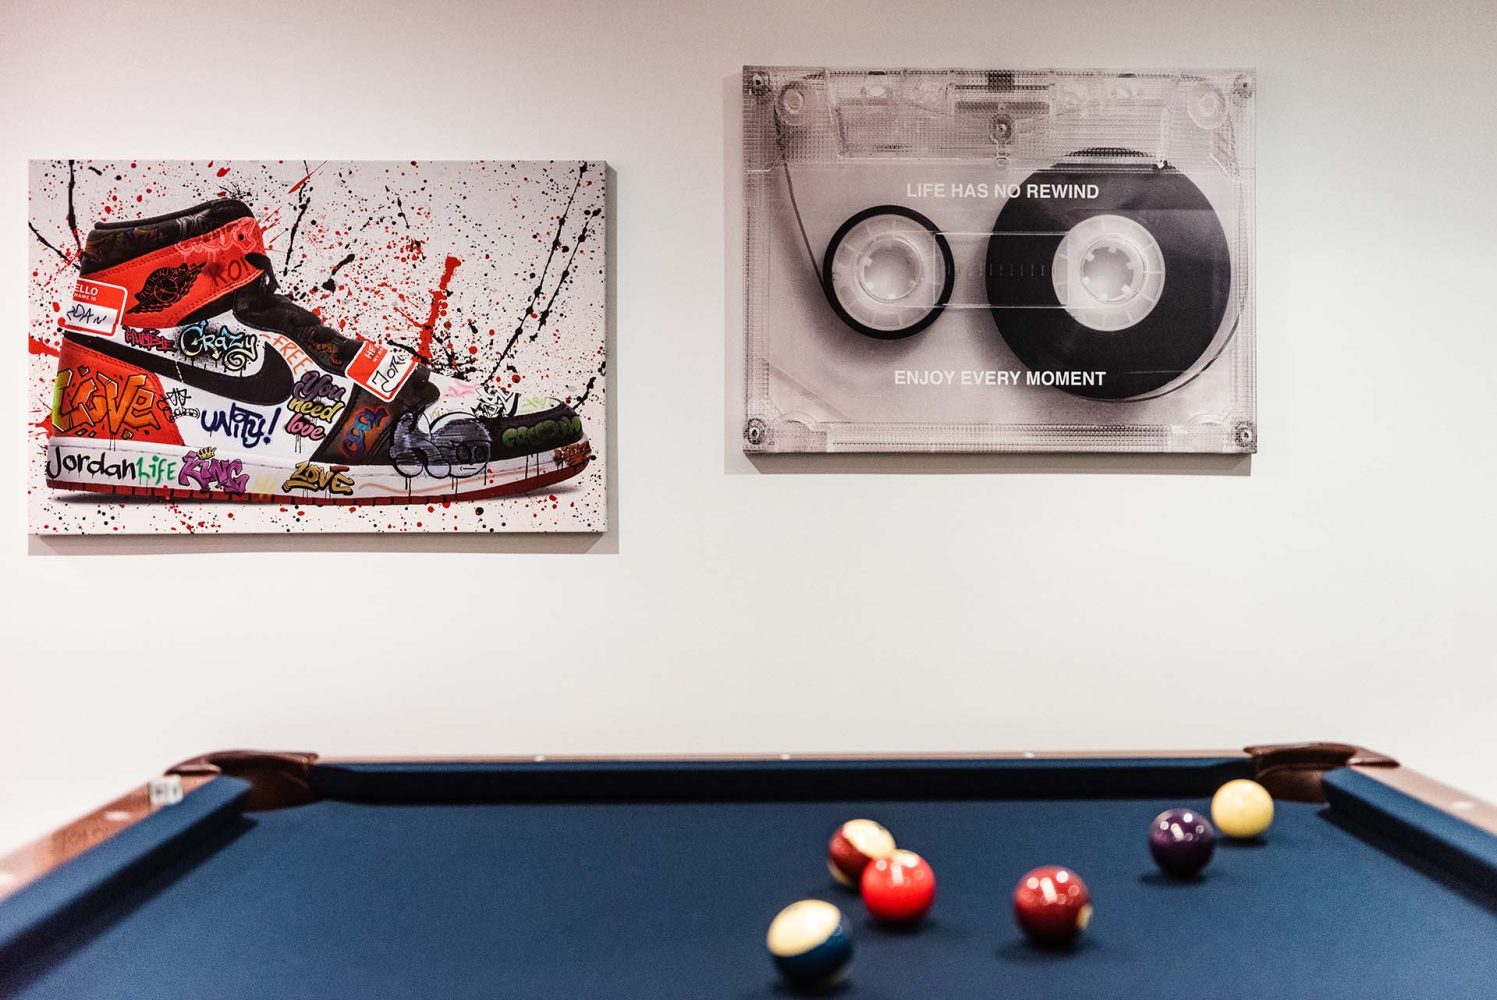 Two art pieces above a pool table. Piece on the left has an Air Jordan sneaker with graffiti and splatter paint, piece on the right is a gigantic clear cassette tape that says Life Has No Rewind Enjoy Every Moment.